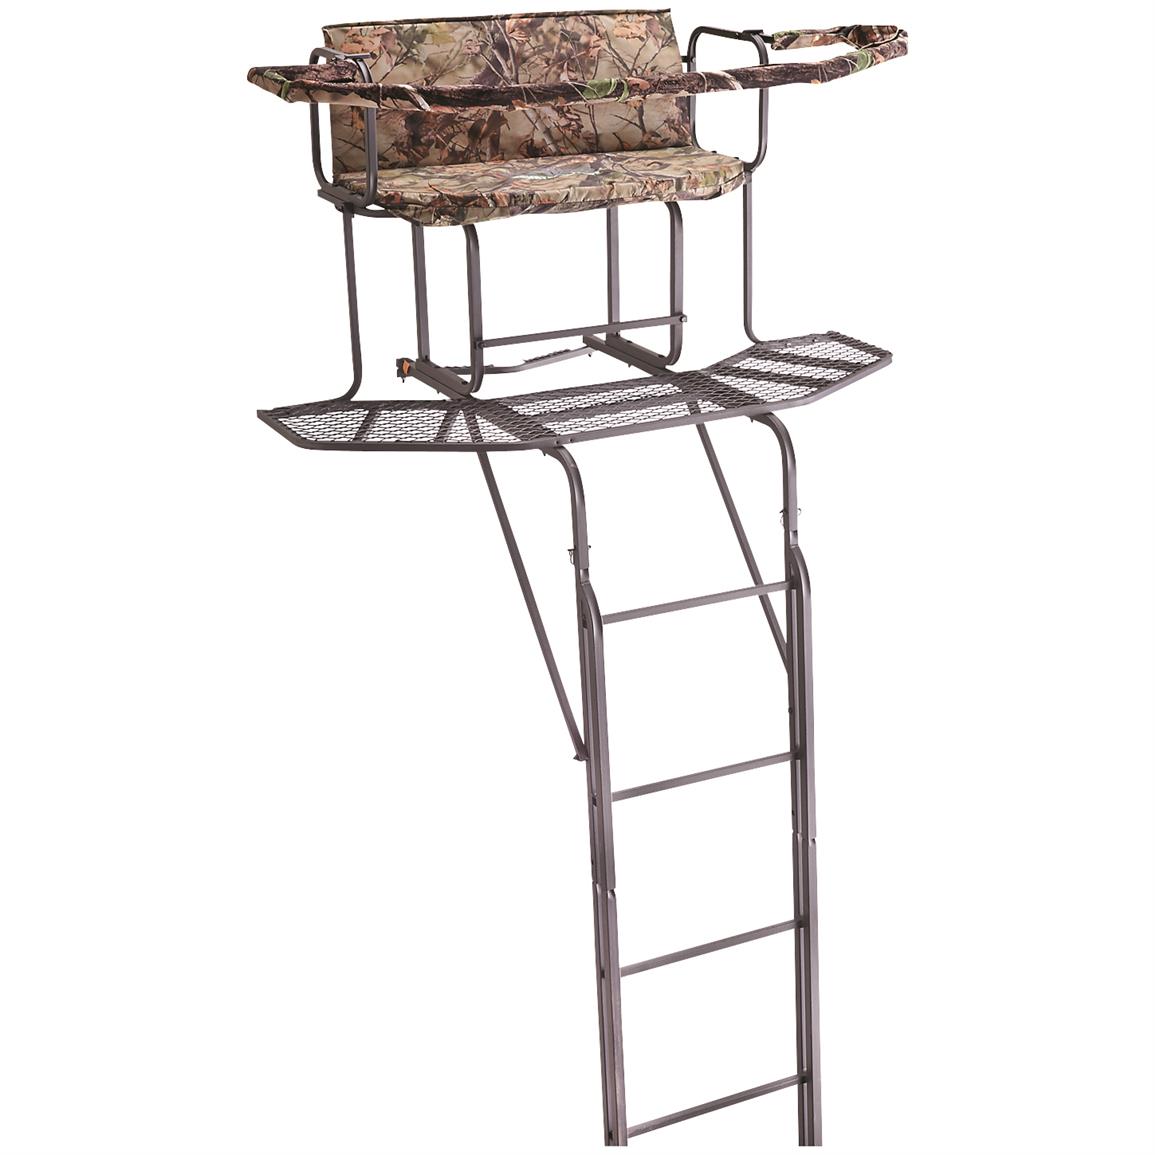 Sturdy steel construction with dual-rail ladder design